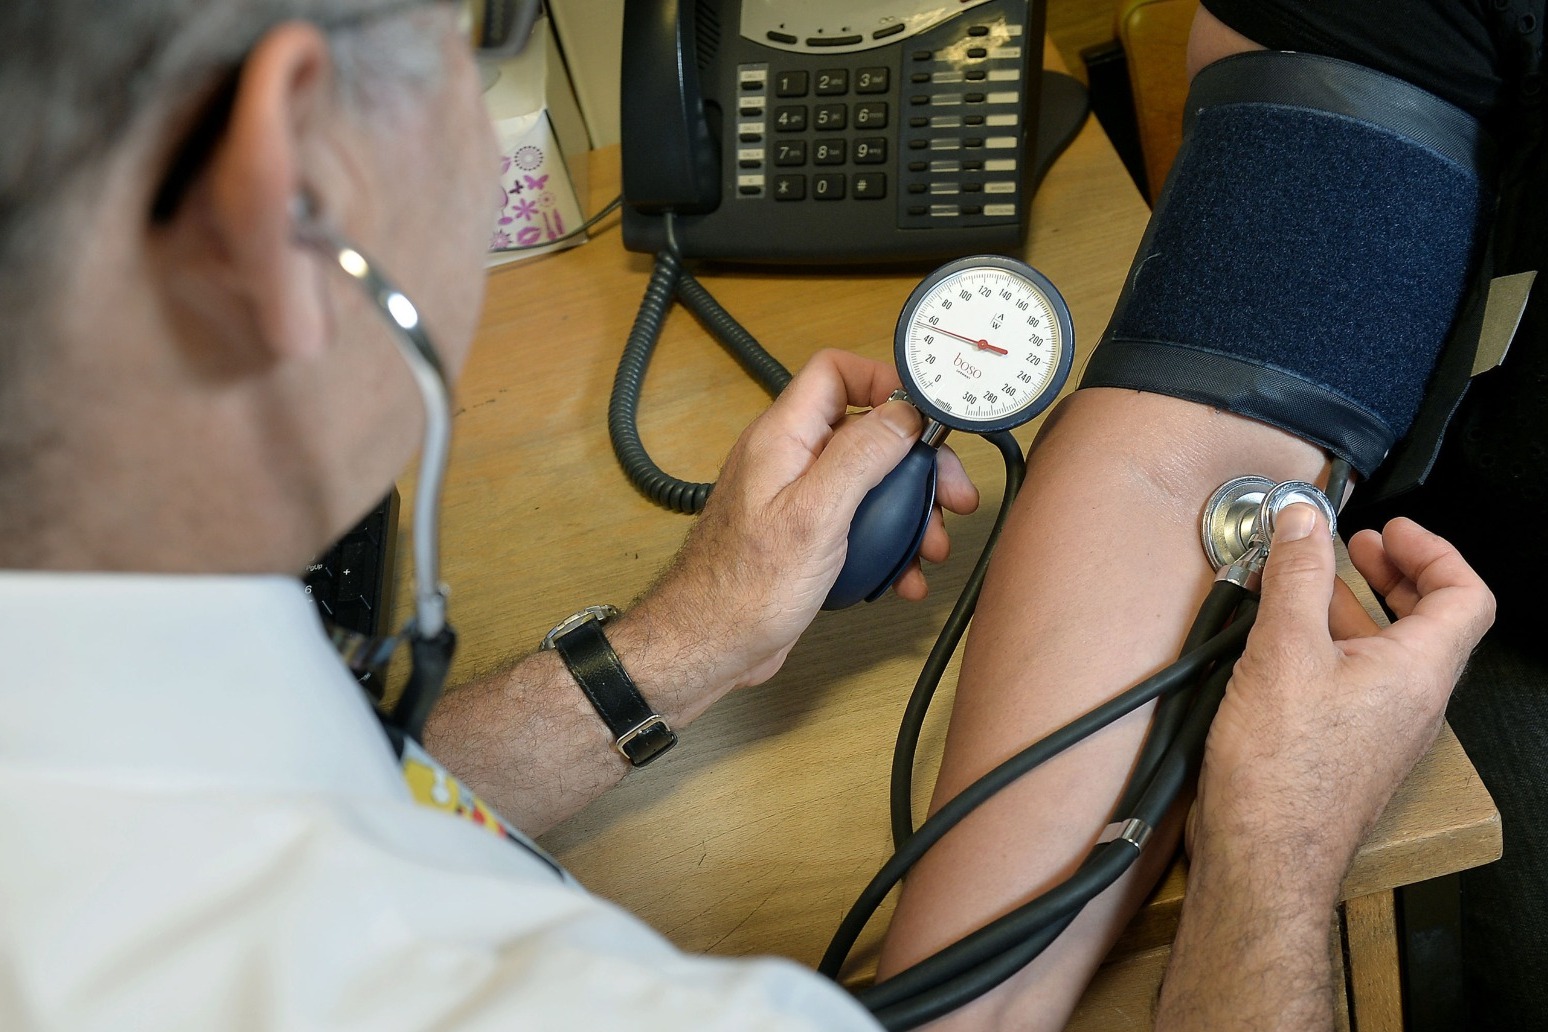 GP appointments to be available on weekends and evenings under NHS plans 